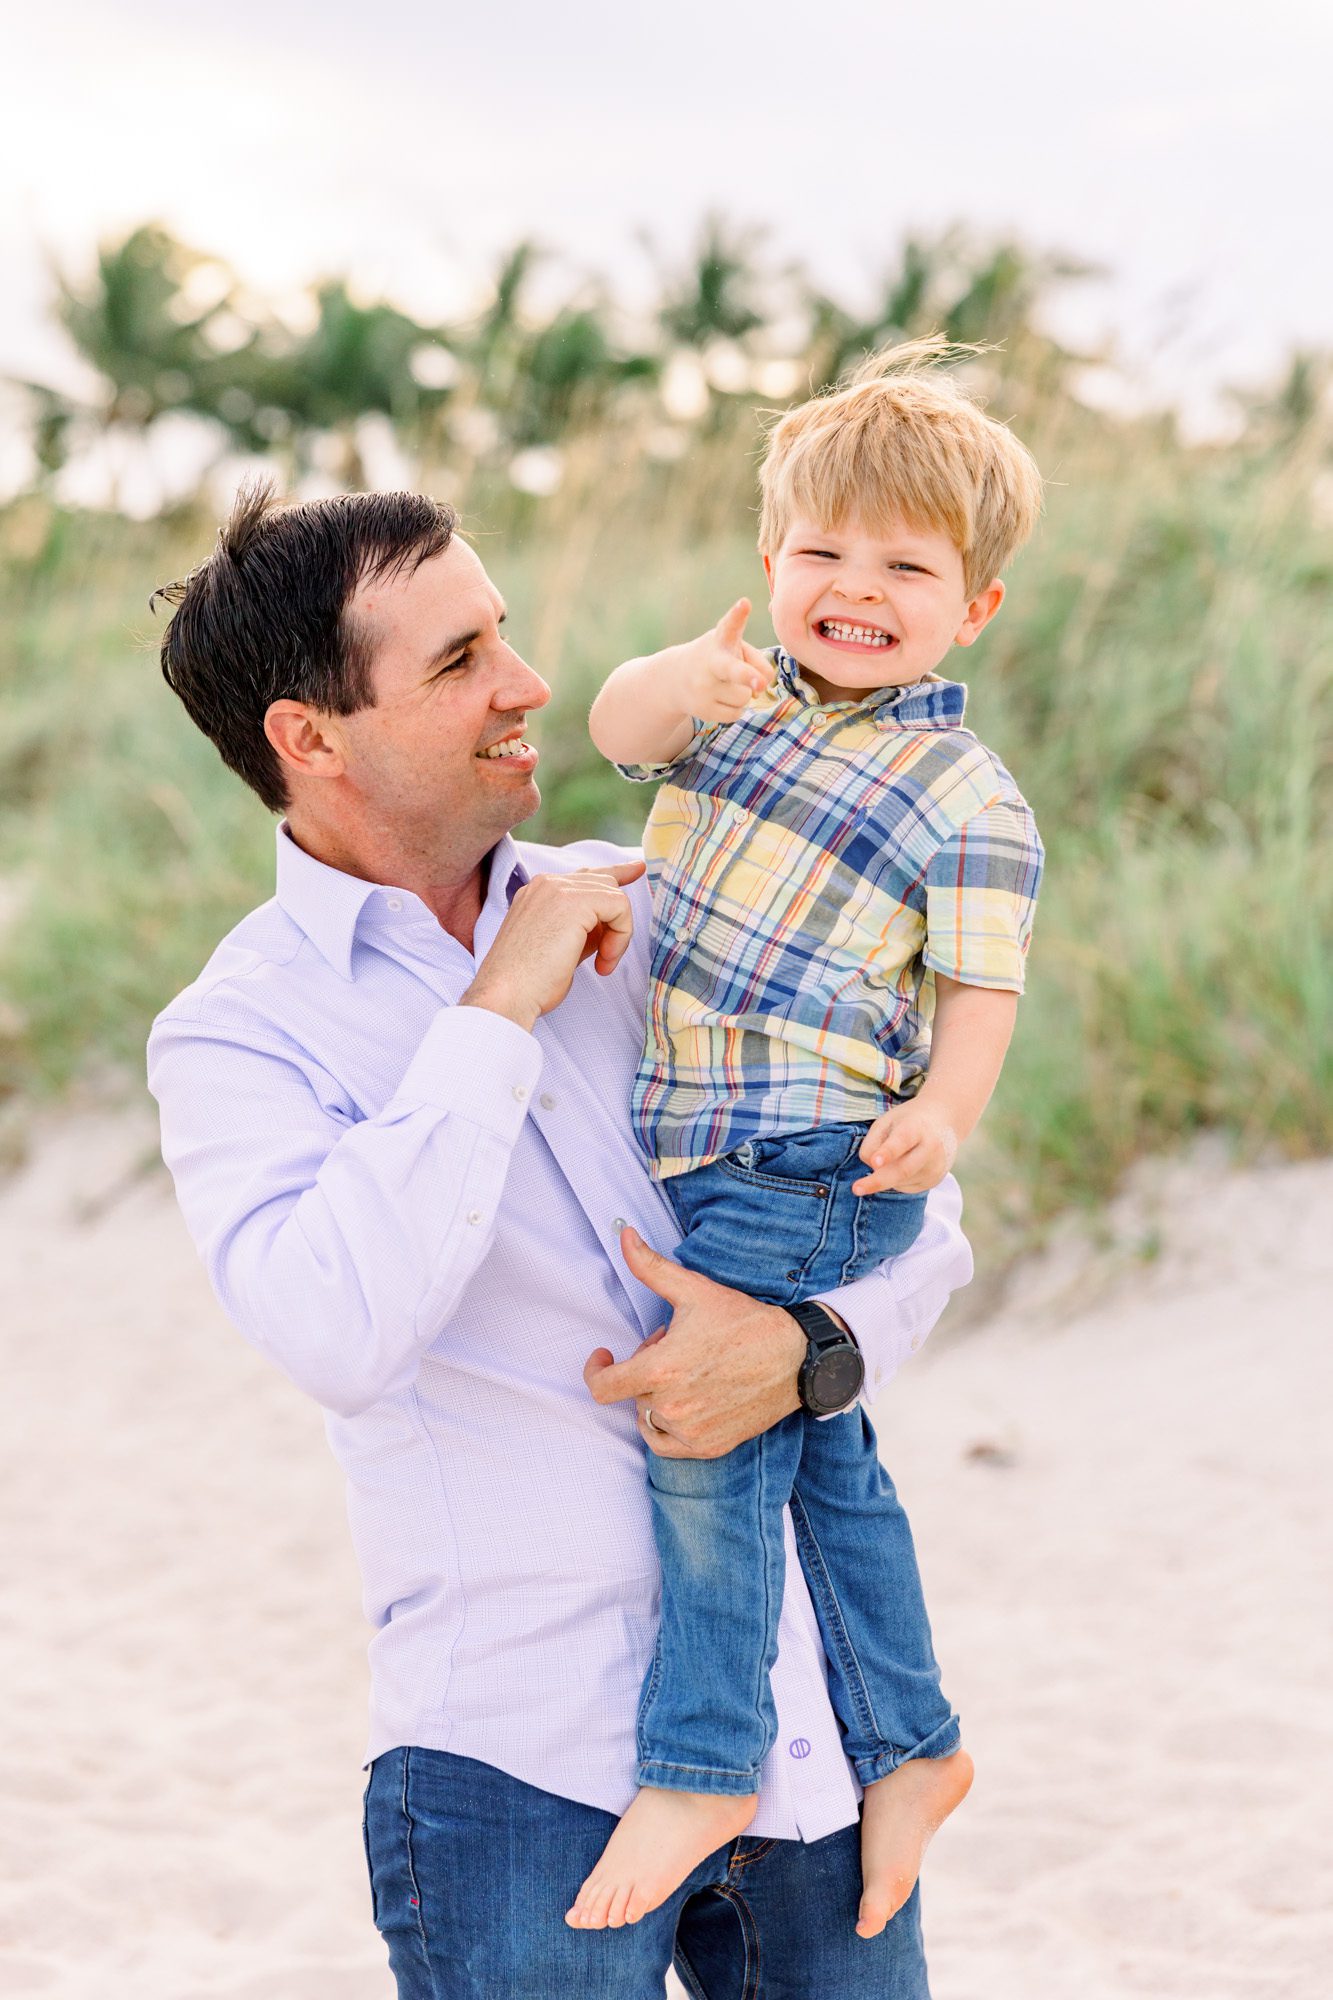 Boy giving thumbs-up and smiling at camera while Dad holds him